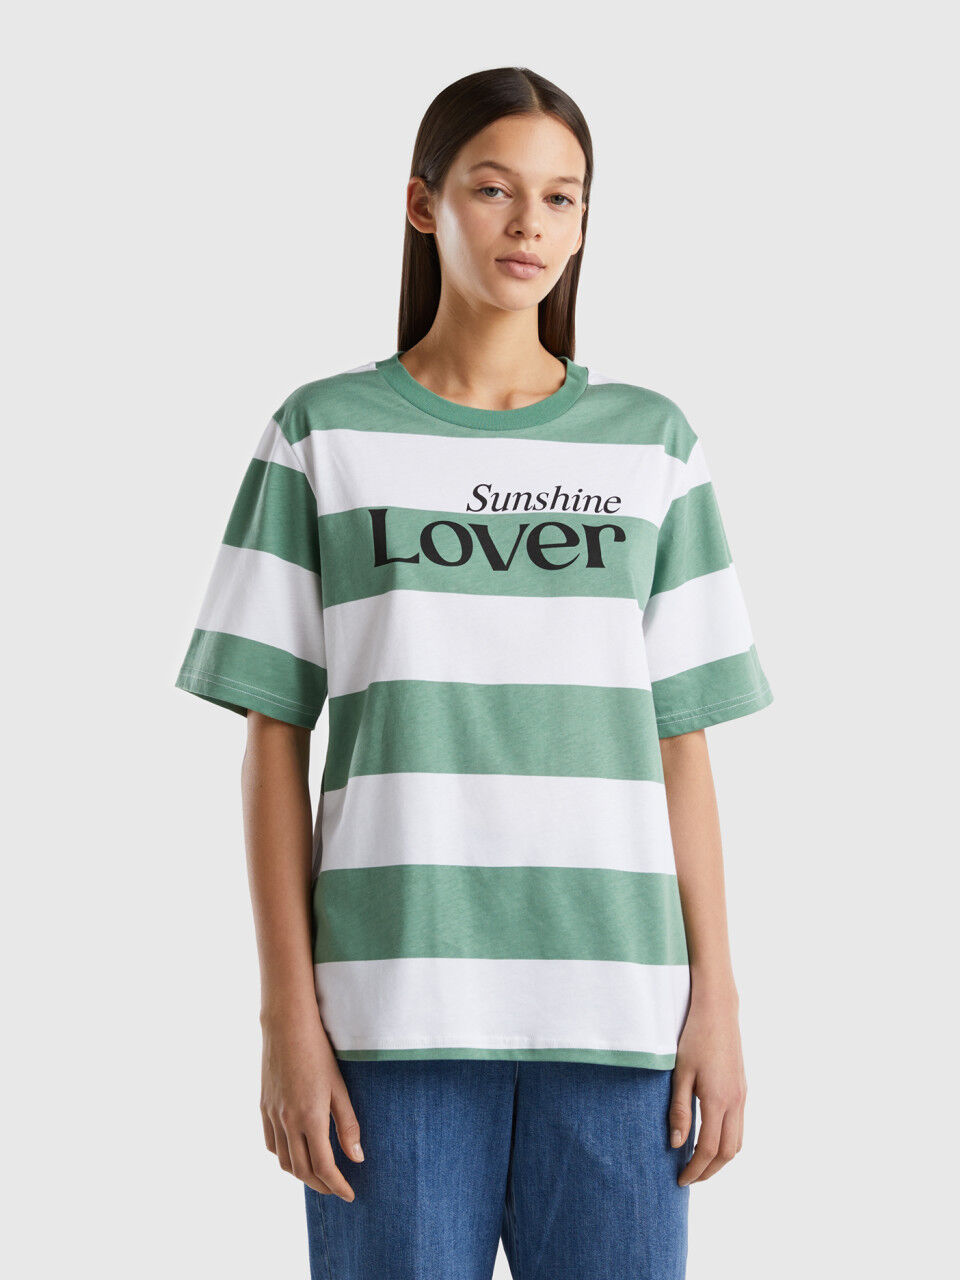 Striped t-shirt with slogan